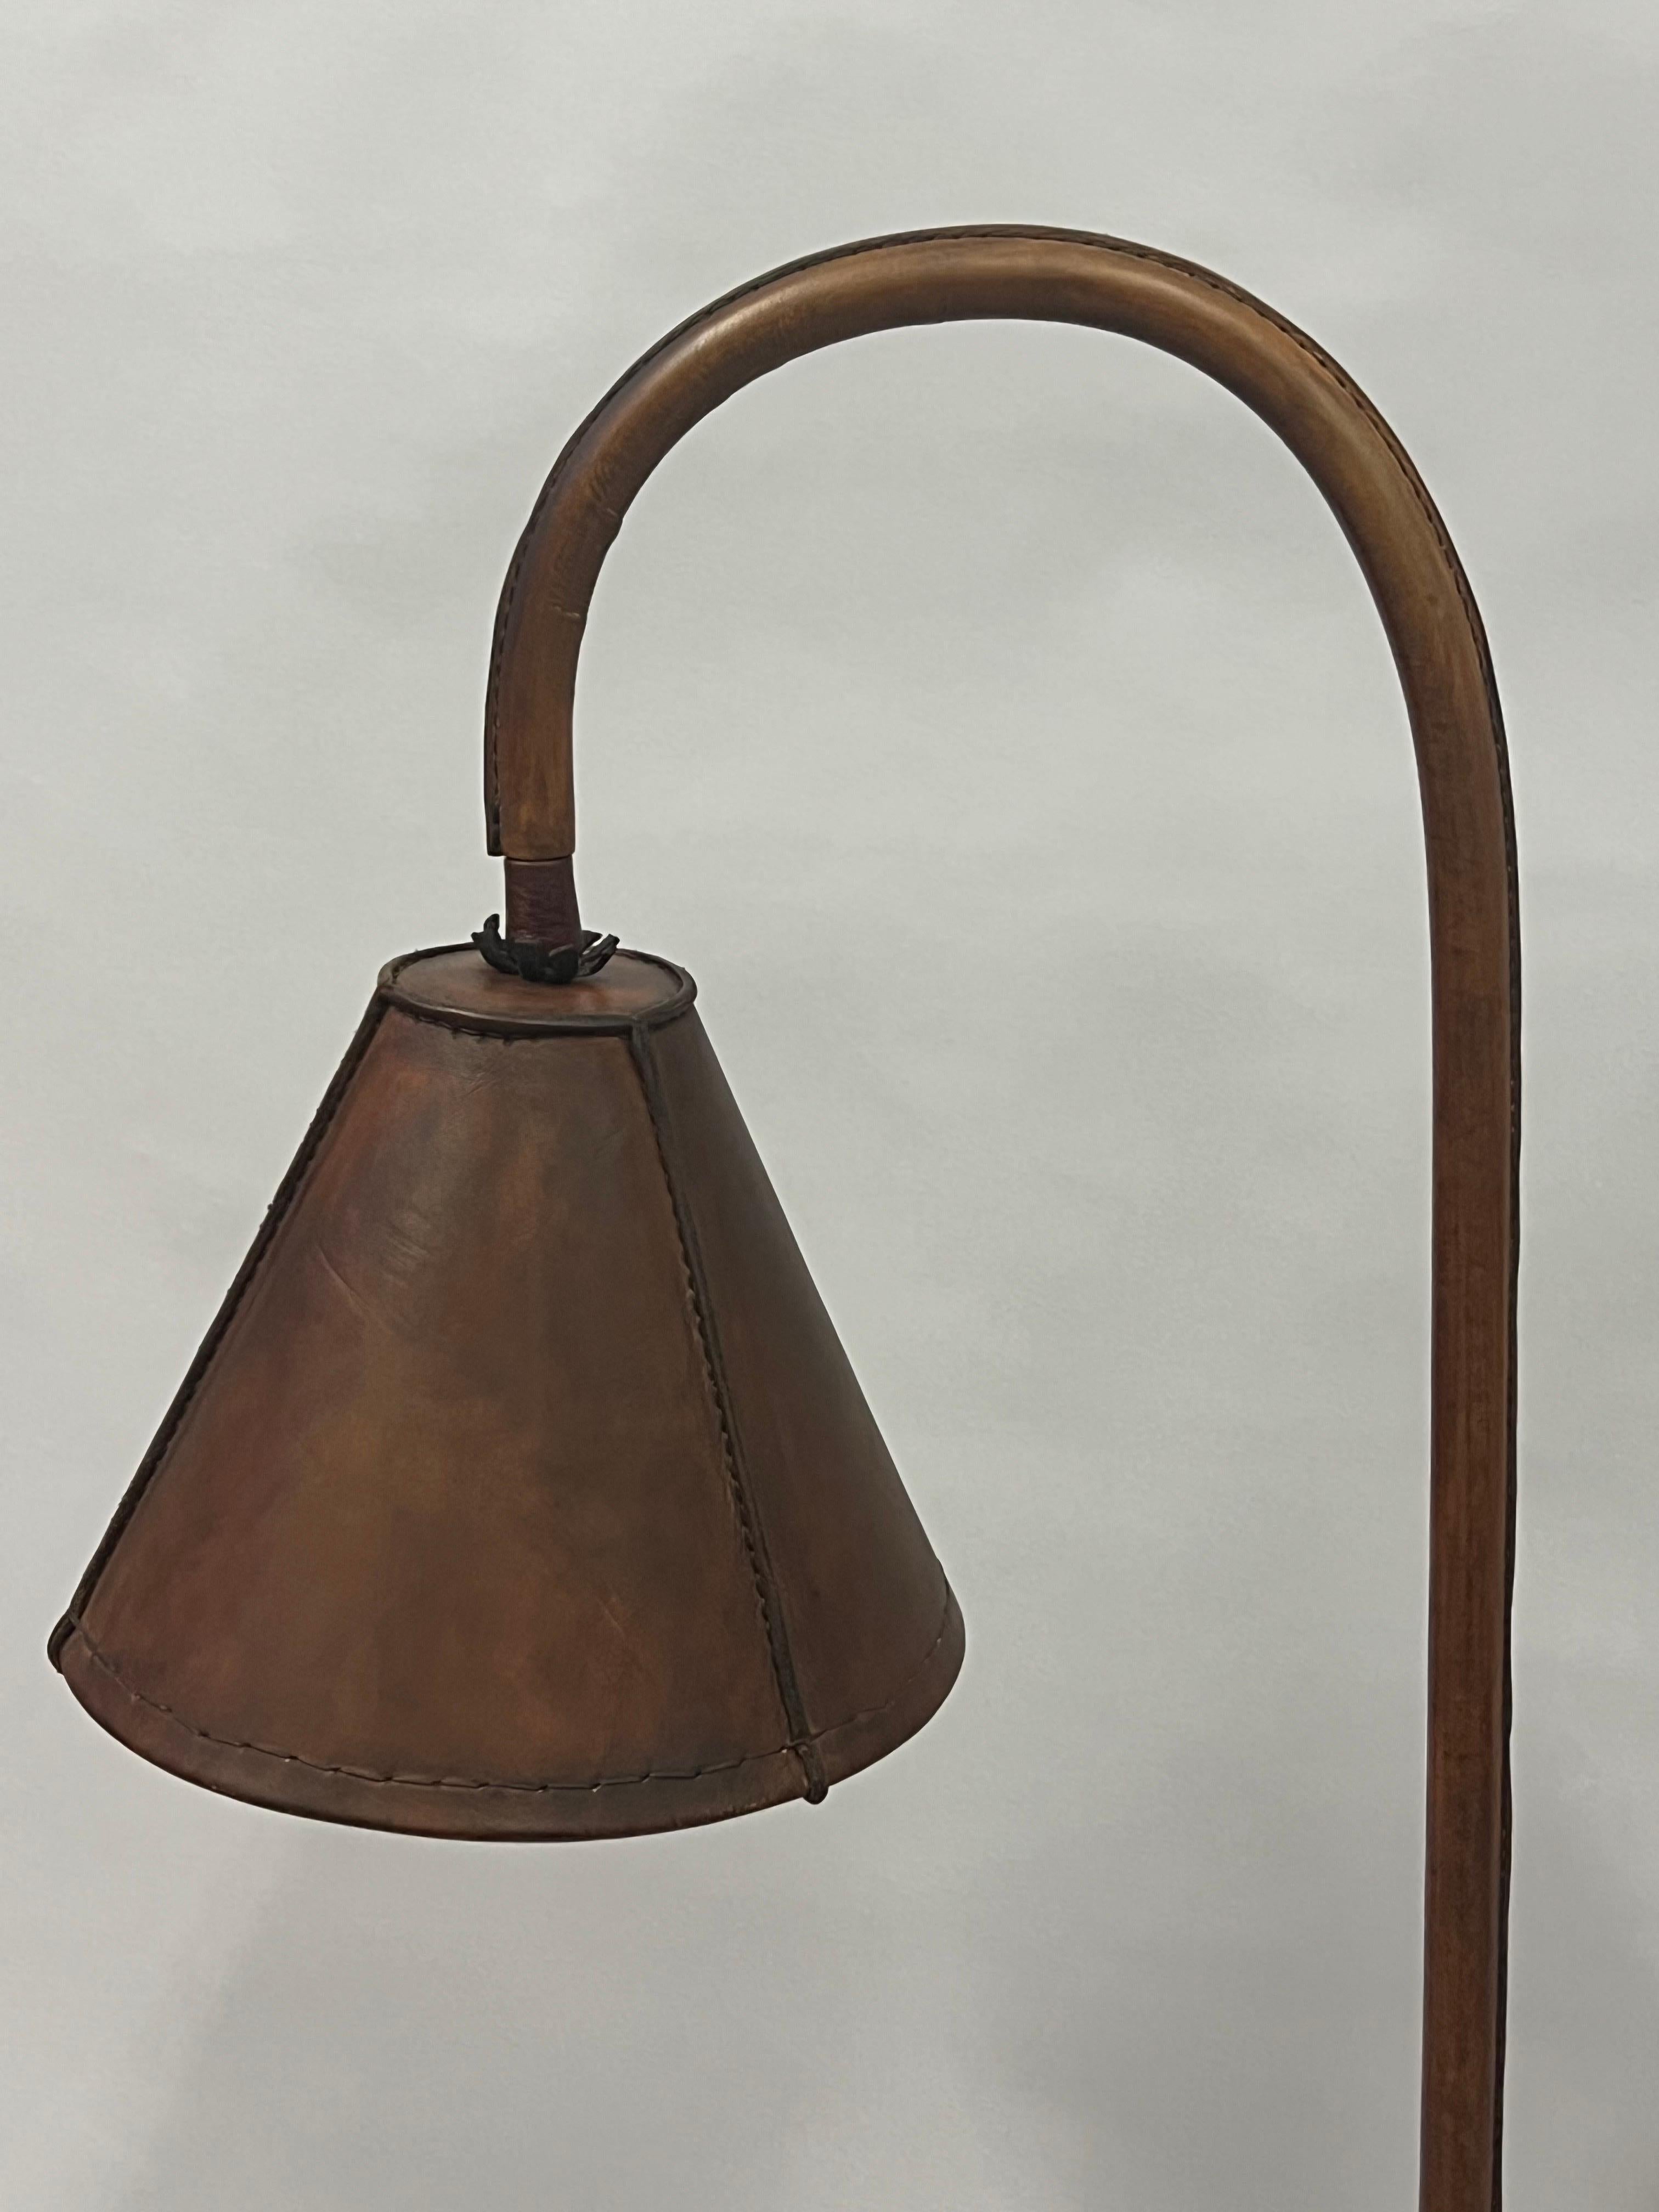 Pair of French Mid-Century Hand-Stitched Leather Floor Lamps by Jacques Adnet For Sale 4